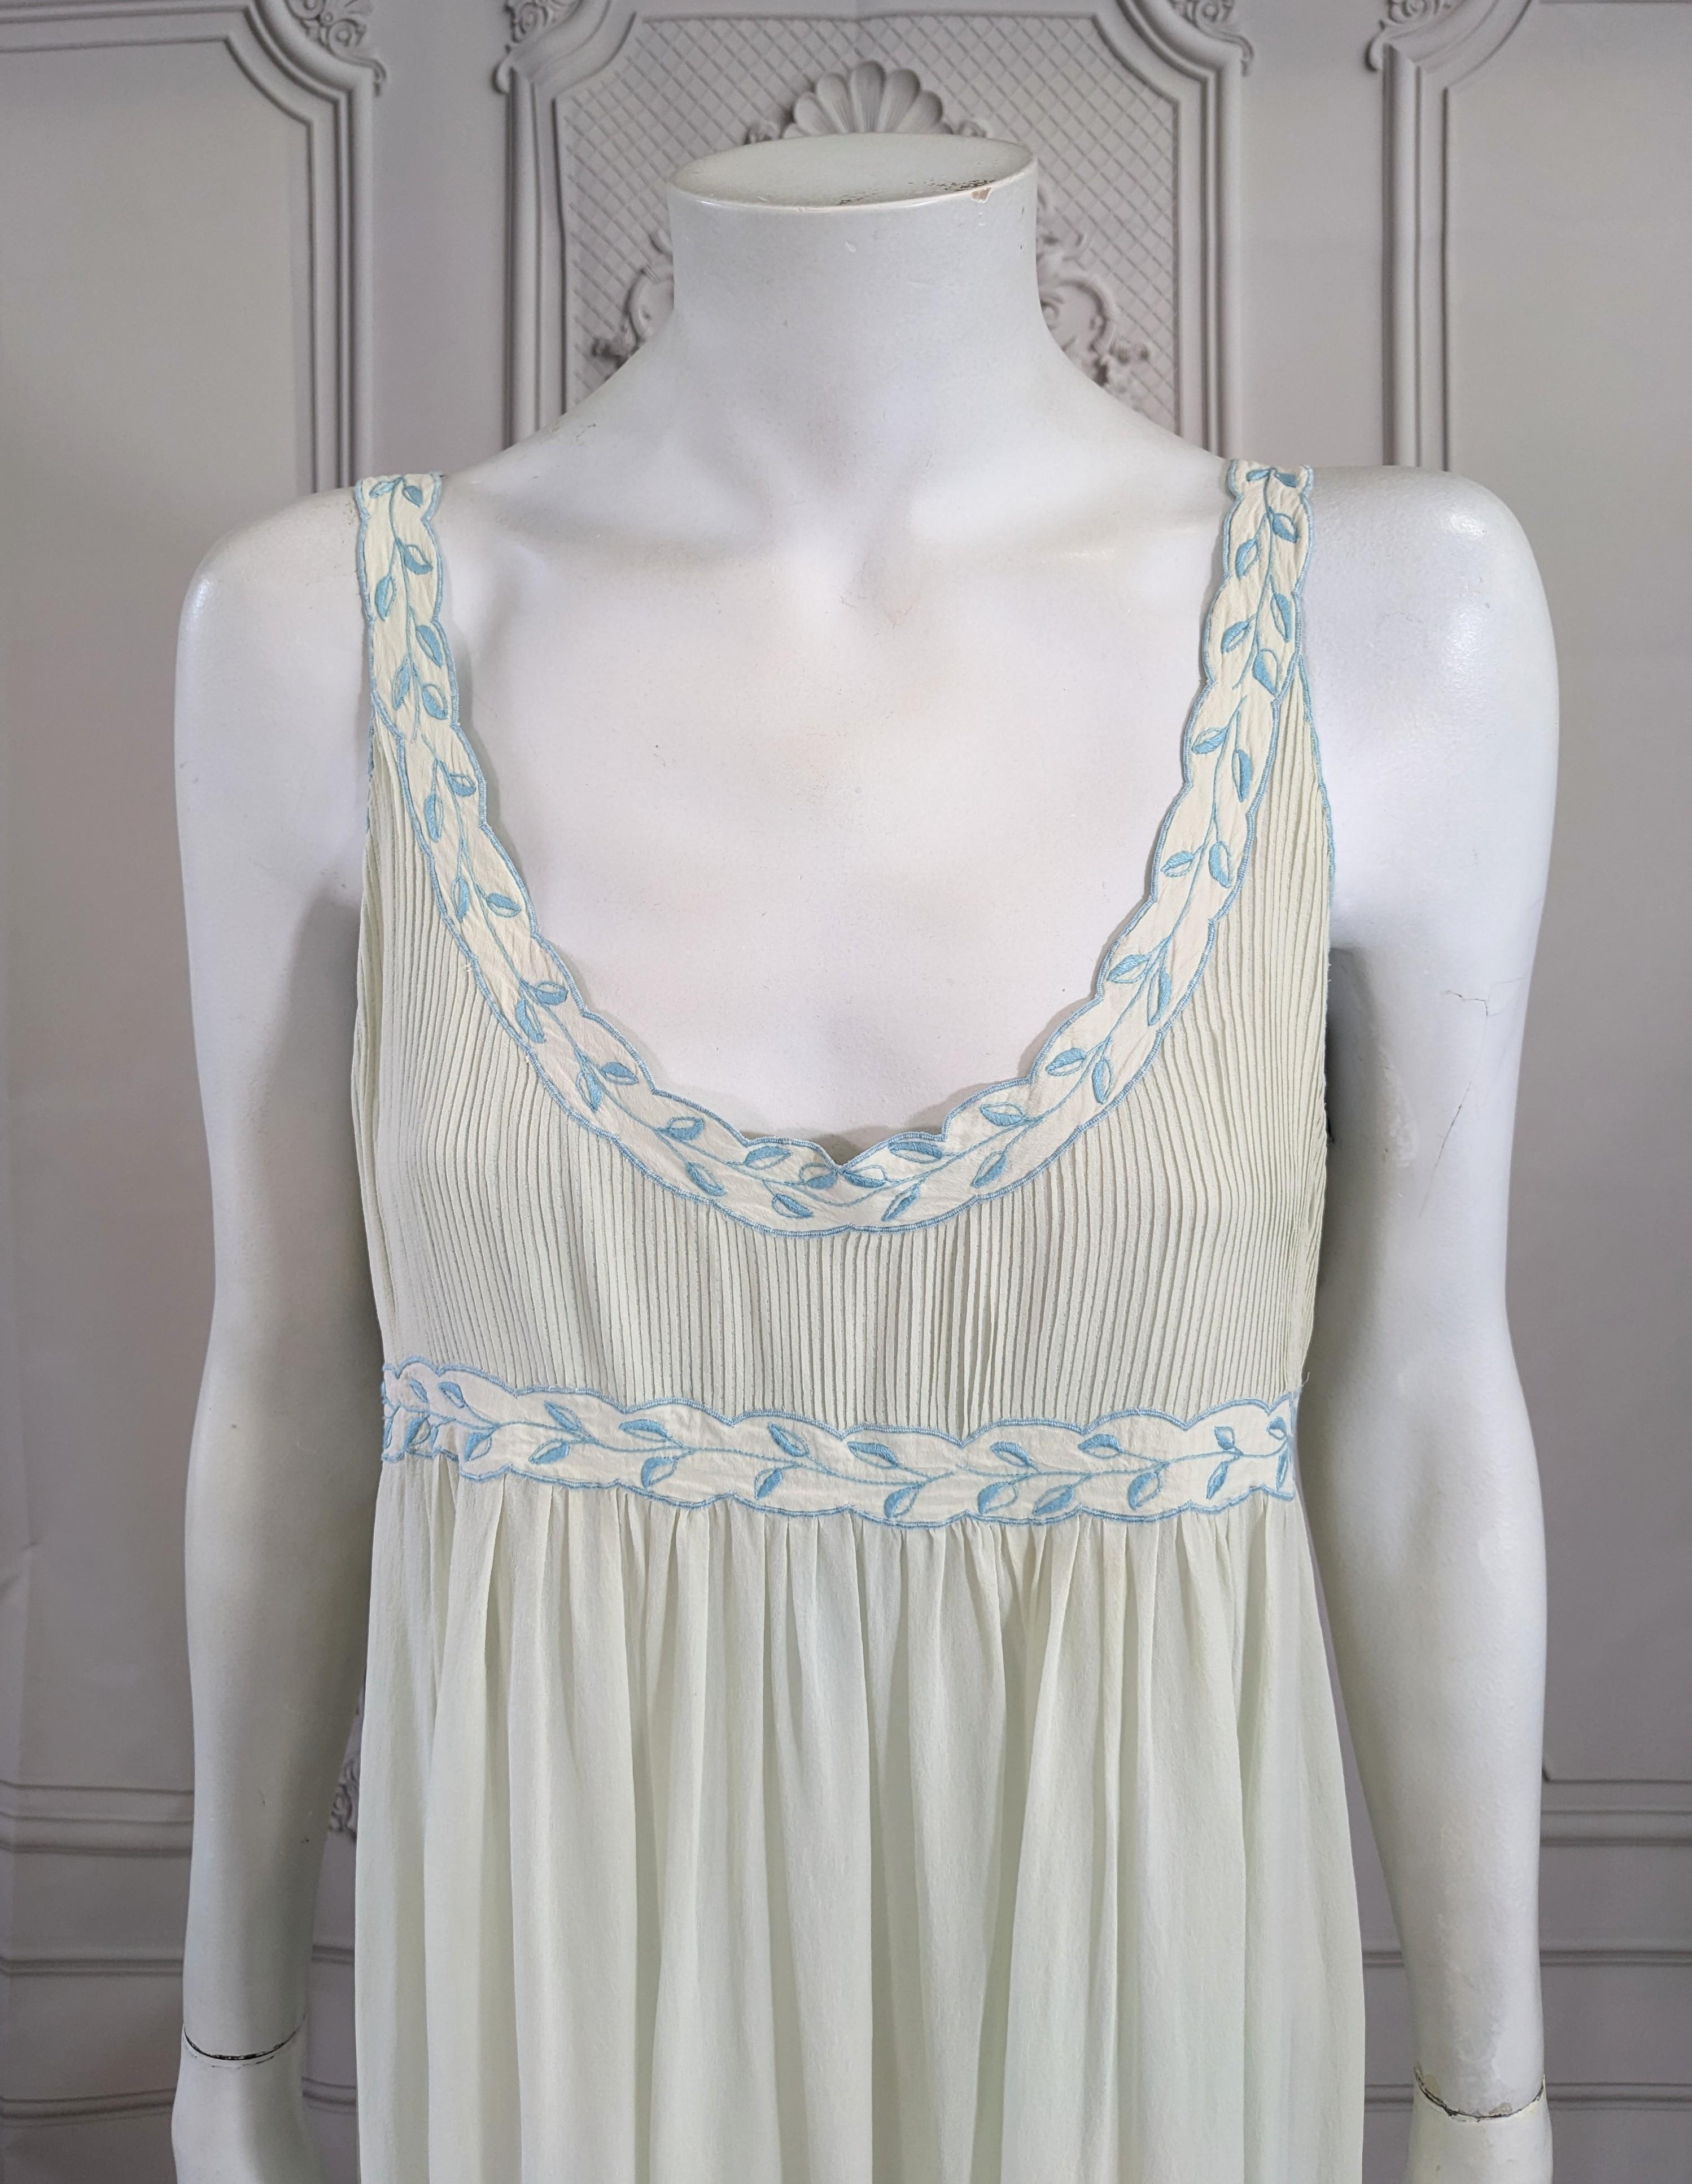 Silk Chiffon Seafoam Slip Dress, Hand Embroidered In Good Condition For Sale In New York, NY